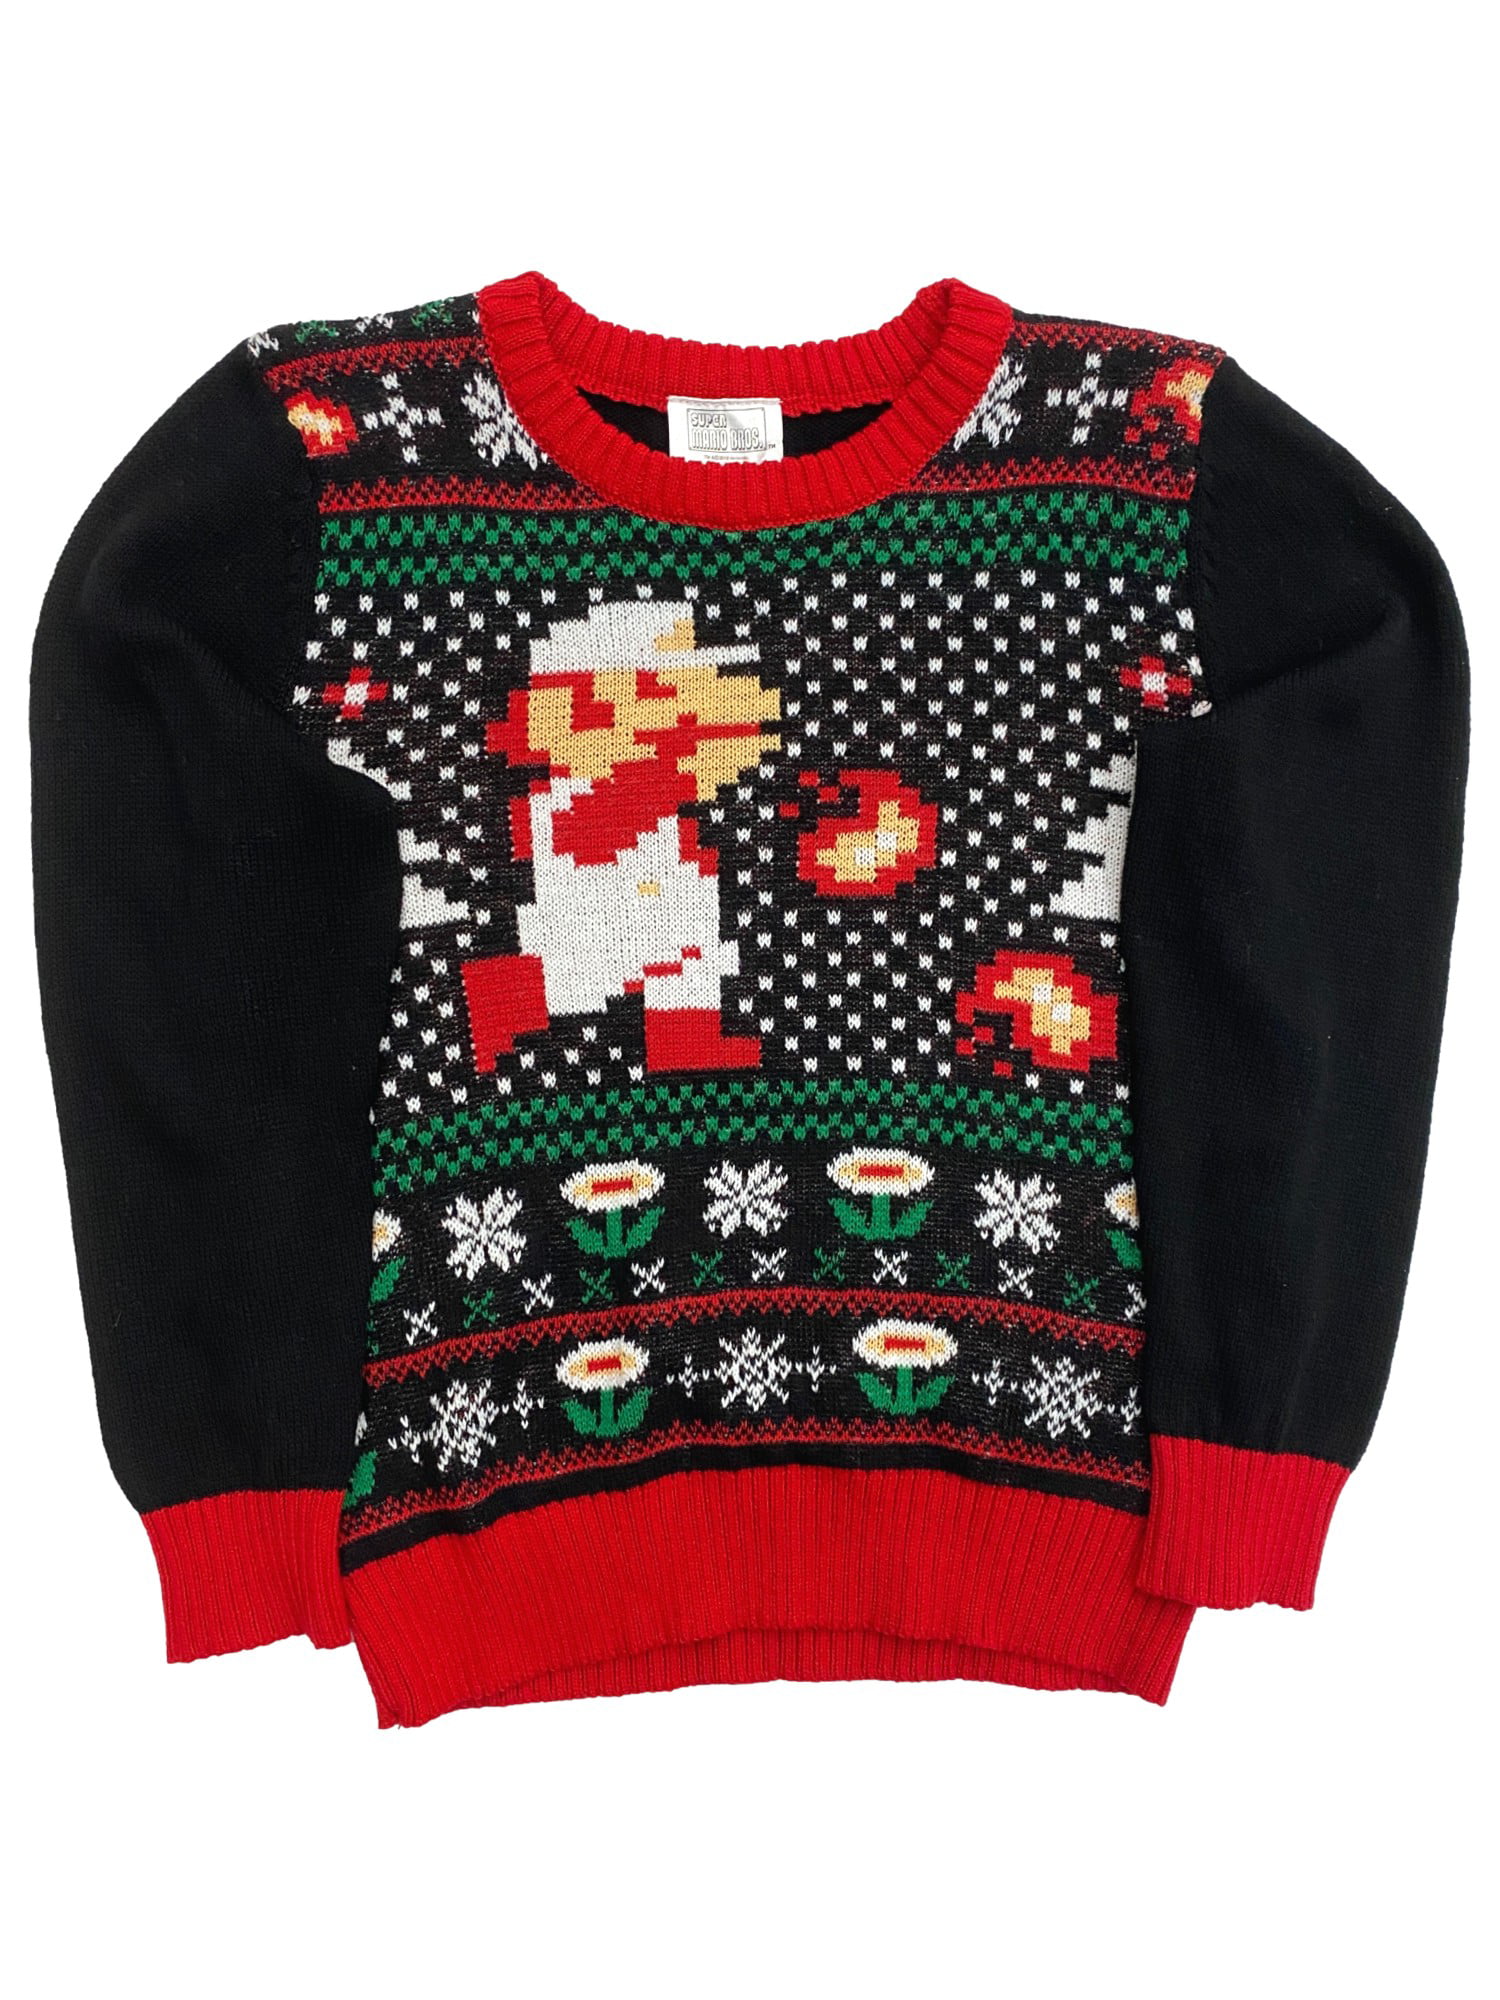 Details about   Disney Store Minnie Mouse Holiday Christmas Sweater Baby Girl Size 12-18M 18-24M 